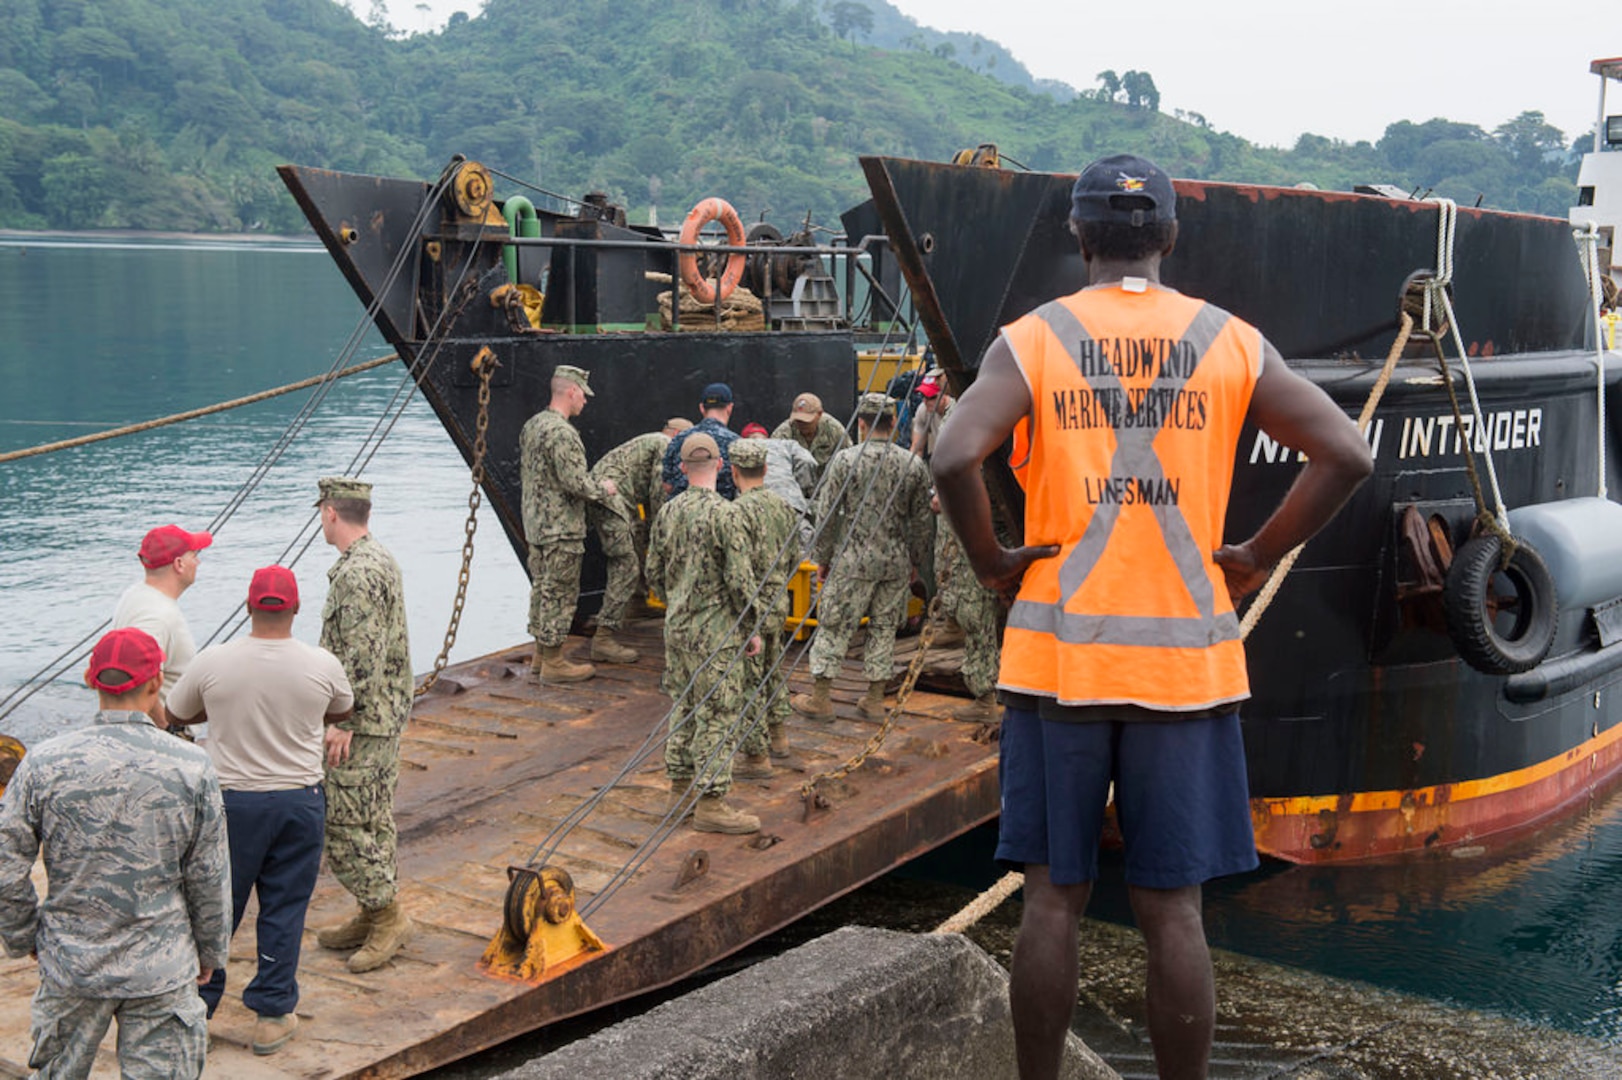 ARAWA, Autonomous Region of Bougainville, Papua New Guinea (June 28, 2015) - A team of Navy Seabees and Air Force REDHORSE engineers unload a ship in preparation for construction operations during Pacific Partnership. The team will refurbish and construct two projects for schools in the Arawa area. The hospital ship USNS Mercy (T-AH 19) is currently in Papua New Guinea for its second mission port of Pacific Partnership 2015. Pacific Partnership is in its tenth iteration and is the largest annual multilateral humanitarian assistance and disaster relief preparedness mission conducted in the Indo-Asia-Pacific region. While training for crisis conditions, Pacific Partnership missions to date have provided real world medical care to approximately 270,000 patients and veterinary services to more than 38,000 animals. Critical infrastructure development has been supported in host nations during more than 180 engineering projects. 